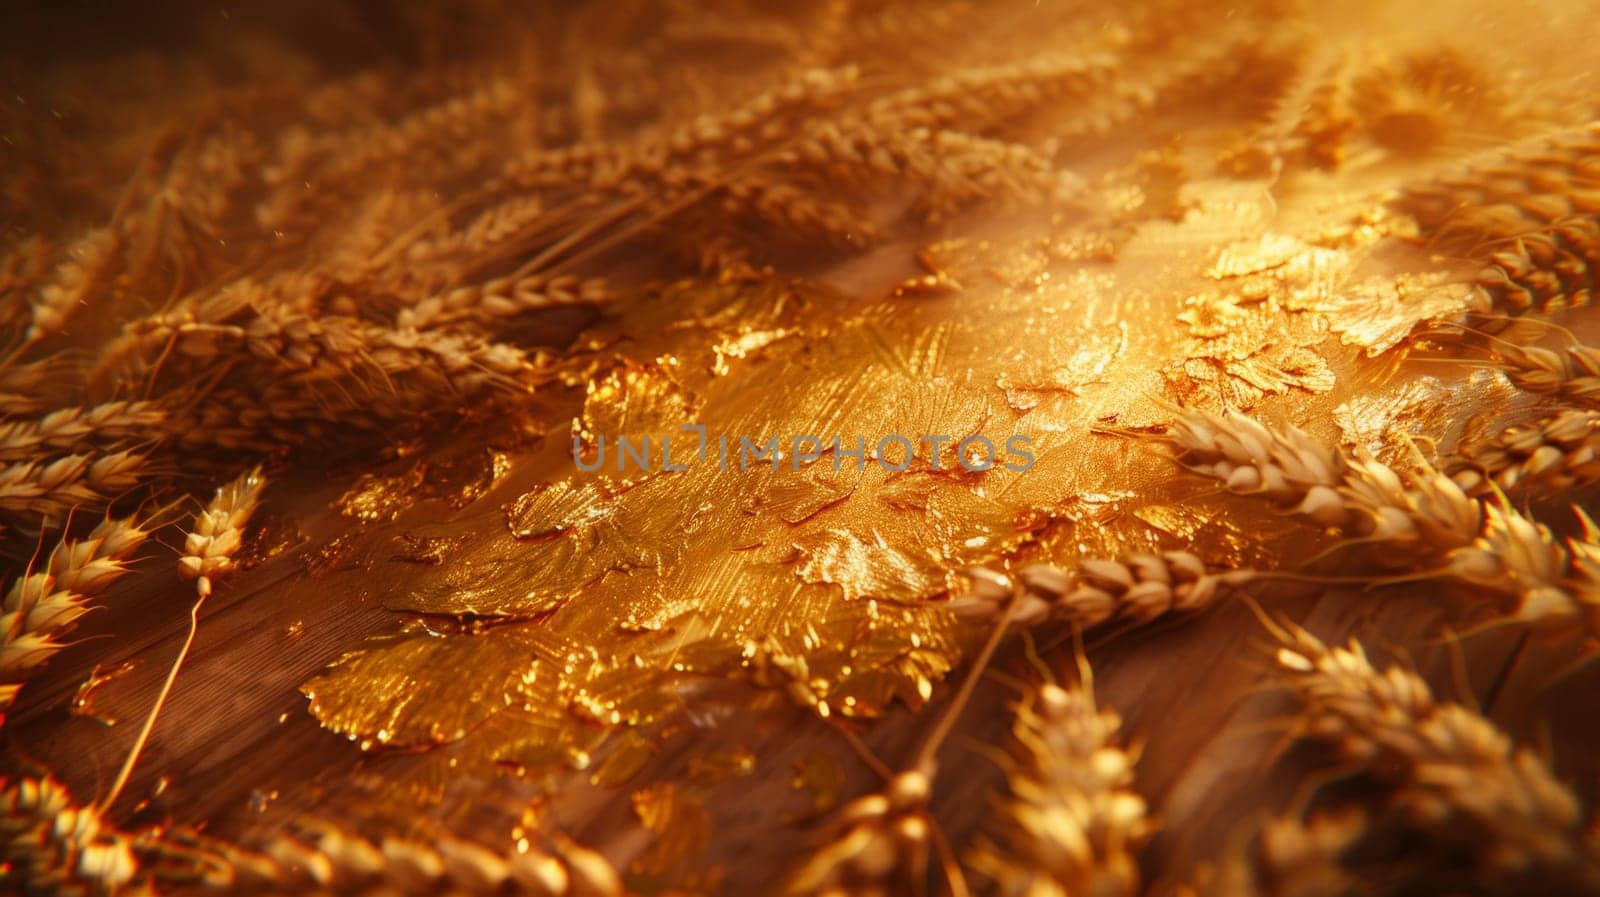 A mesmerizing close-up view of a bunch of golden wheat, swaying gently in the breeze with a warm and inviting glow.